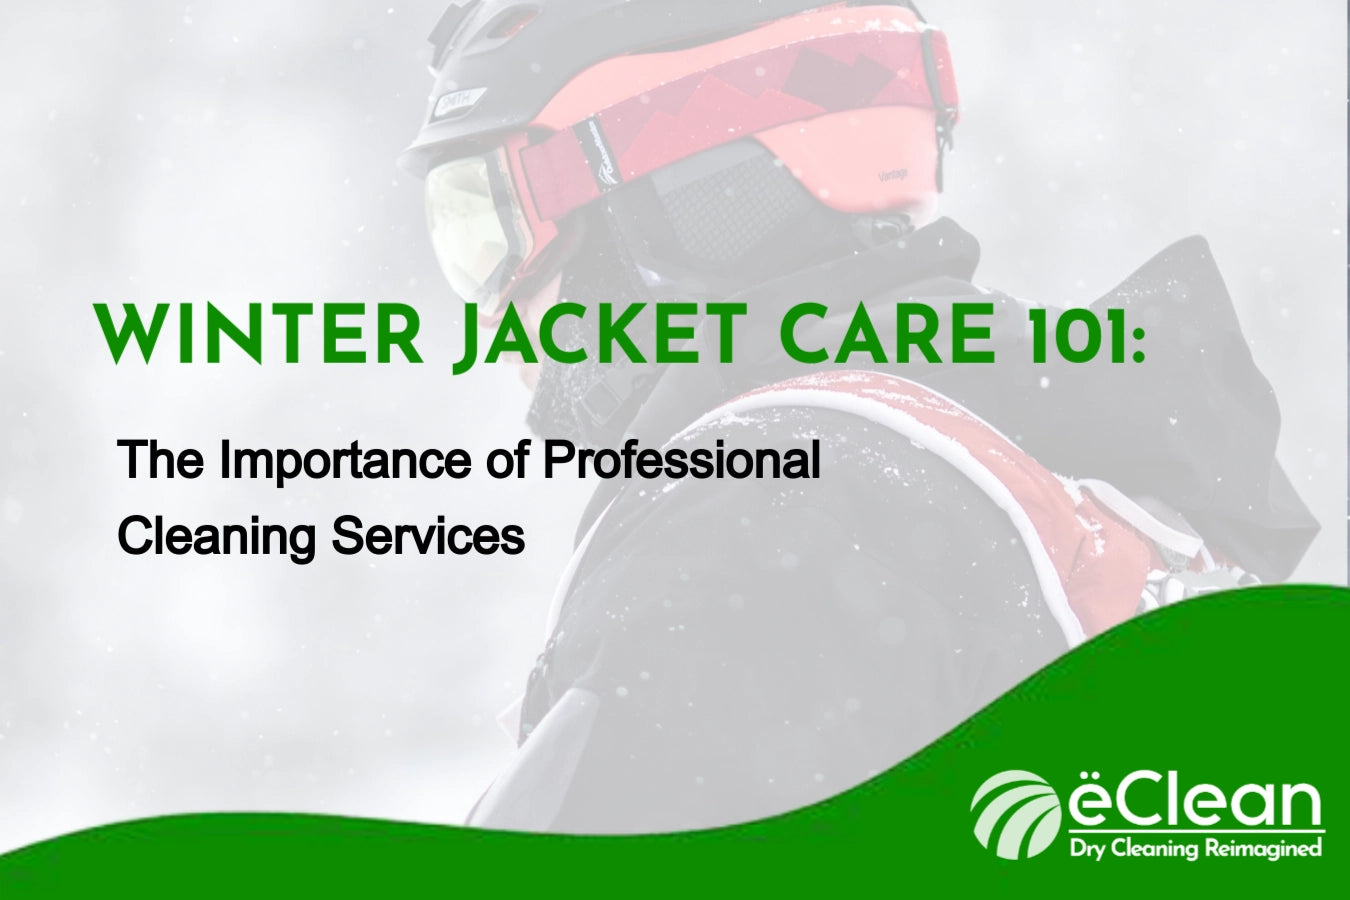 Winter Jacket Care 101: The Importance of Professional Cleaning Services